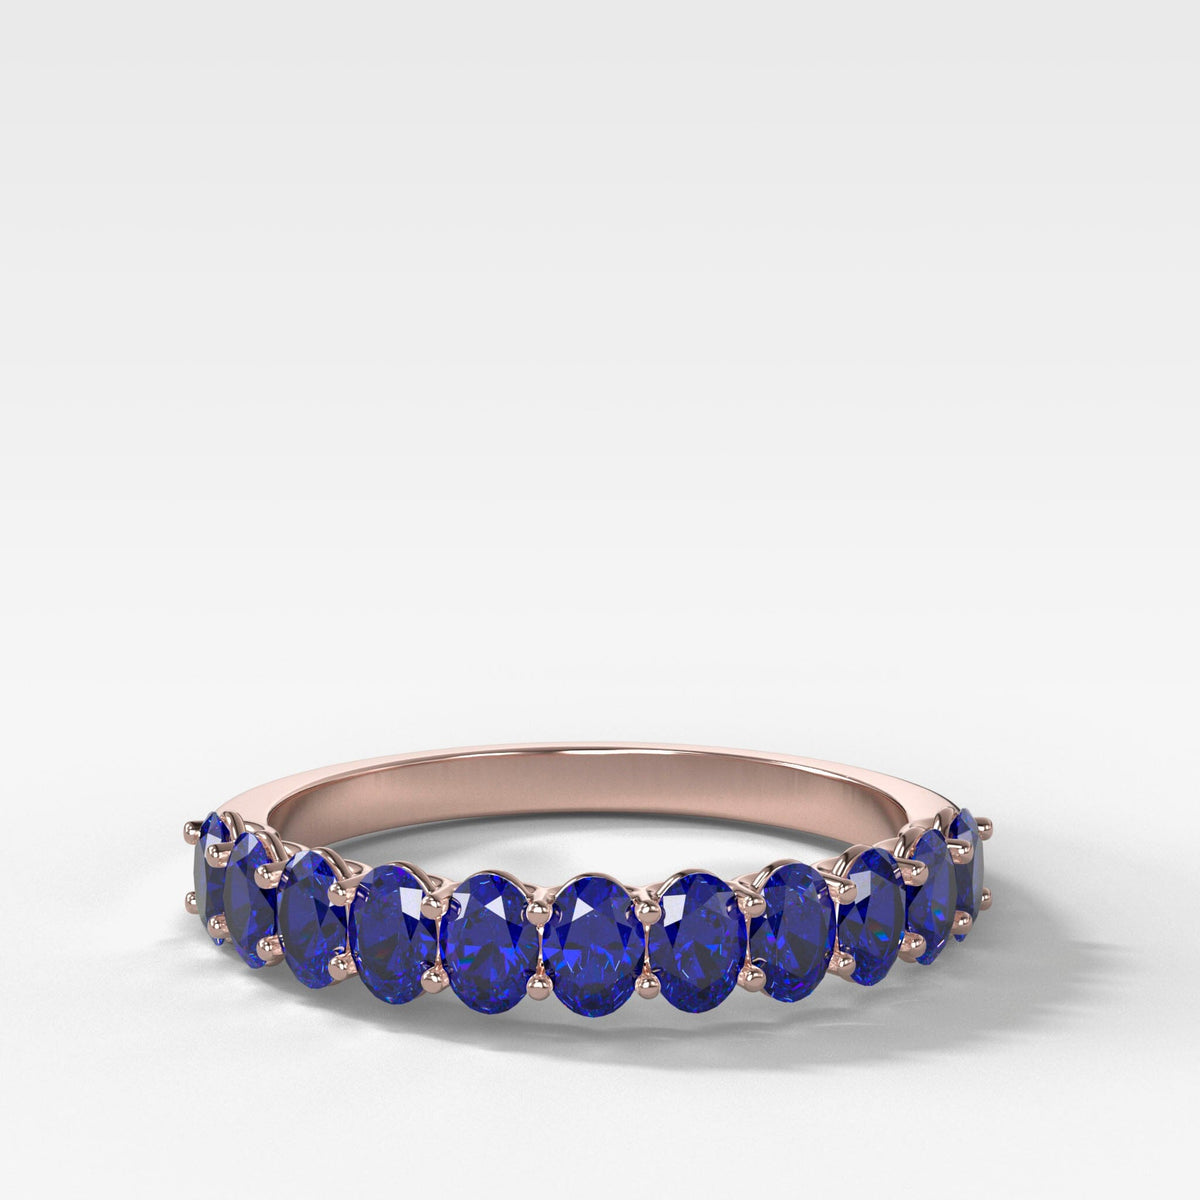 Petite Shared Prong Wedding Band with Blue Oval Sapphires Band Good Stone Inc Rose Gold 14k Natural